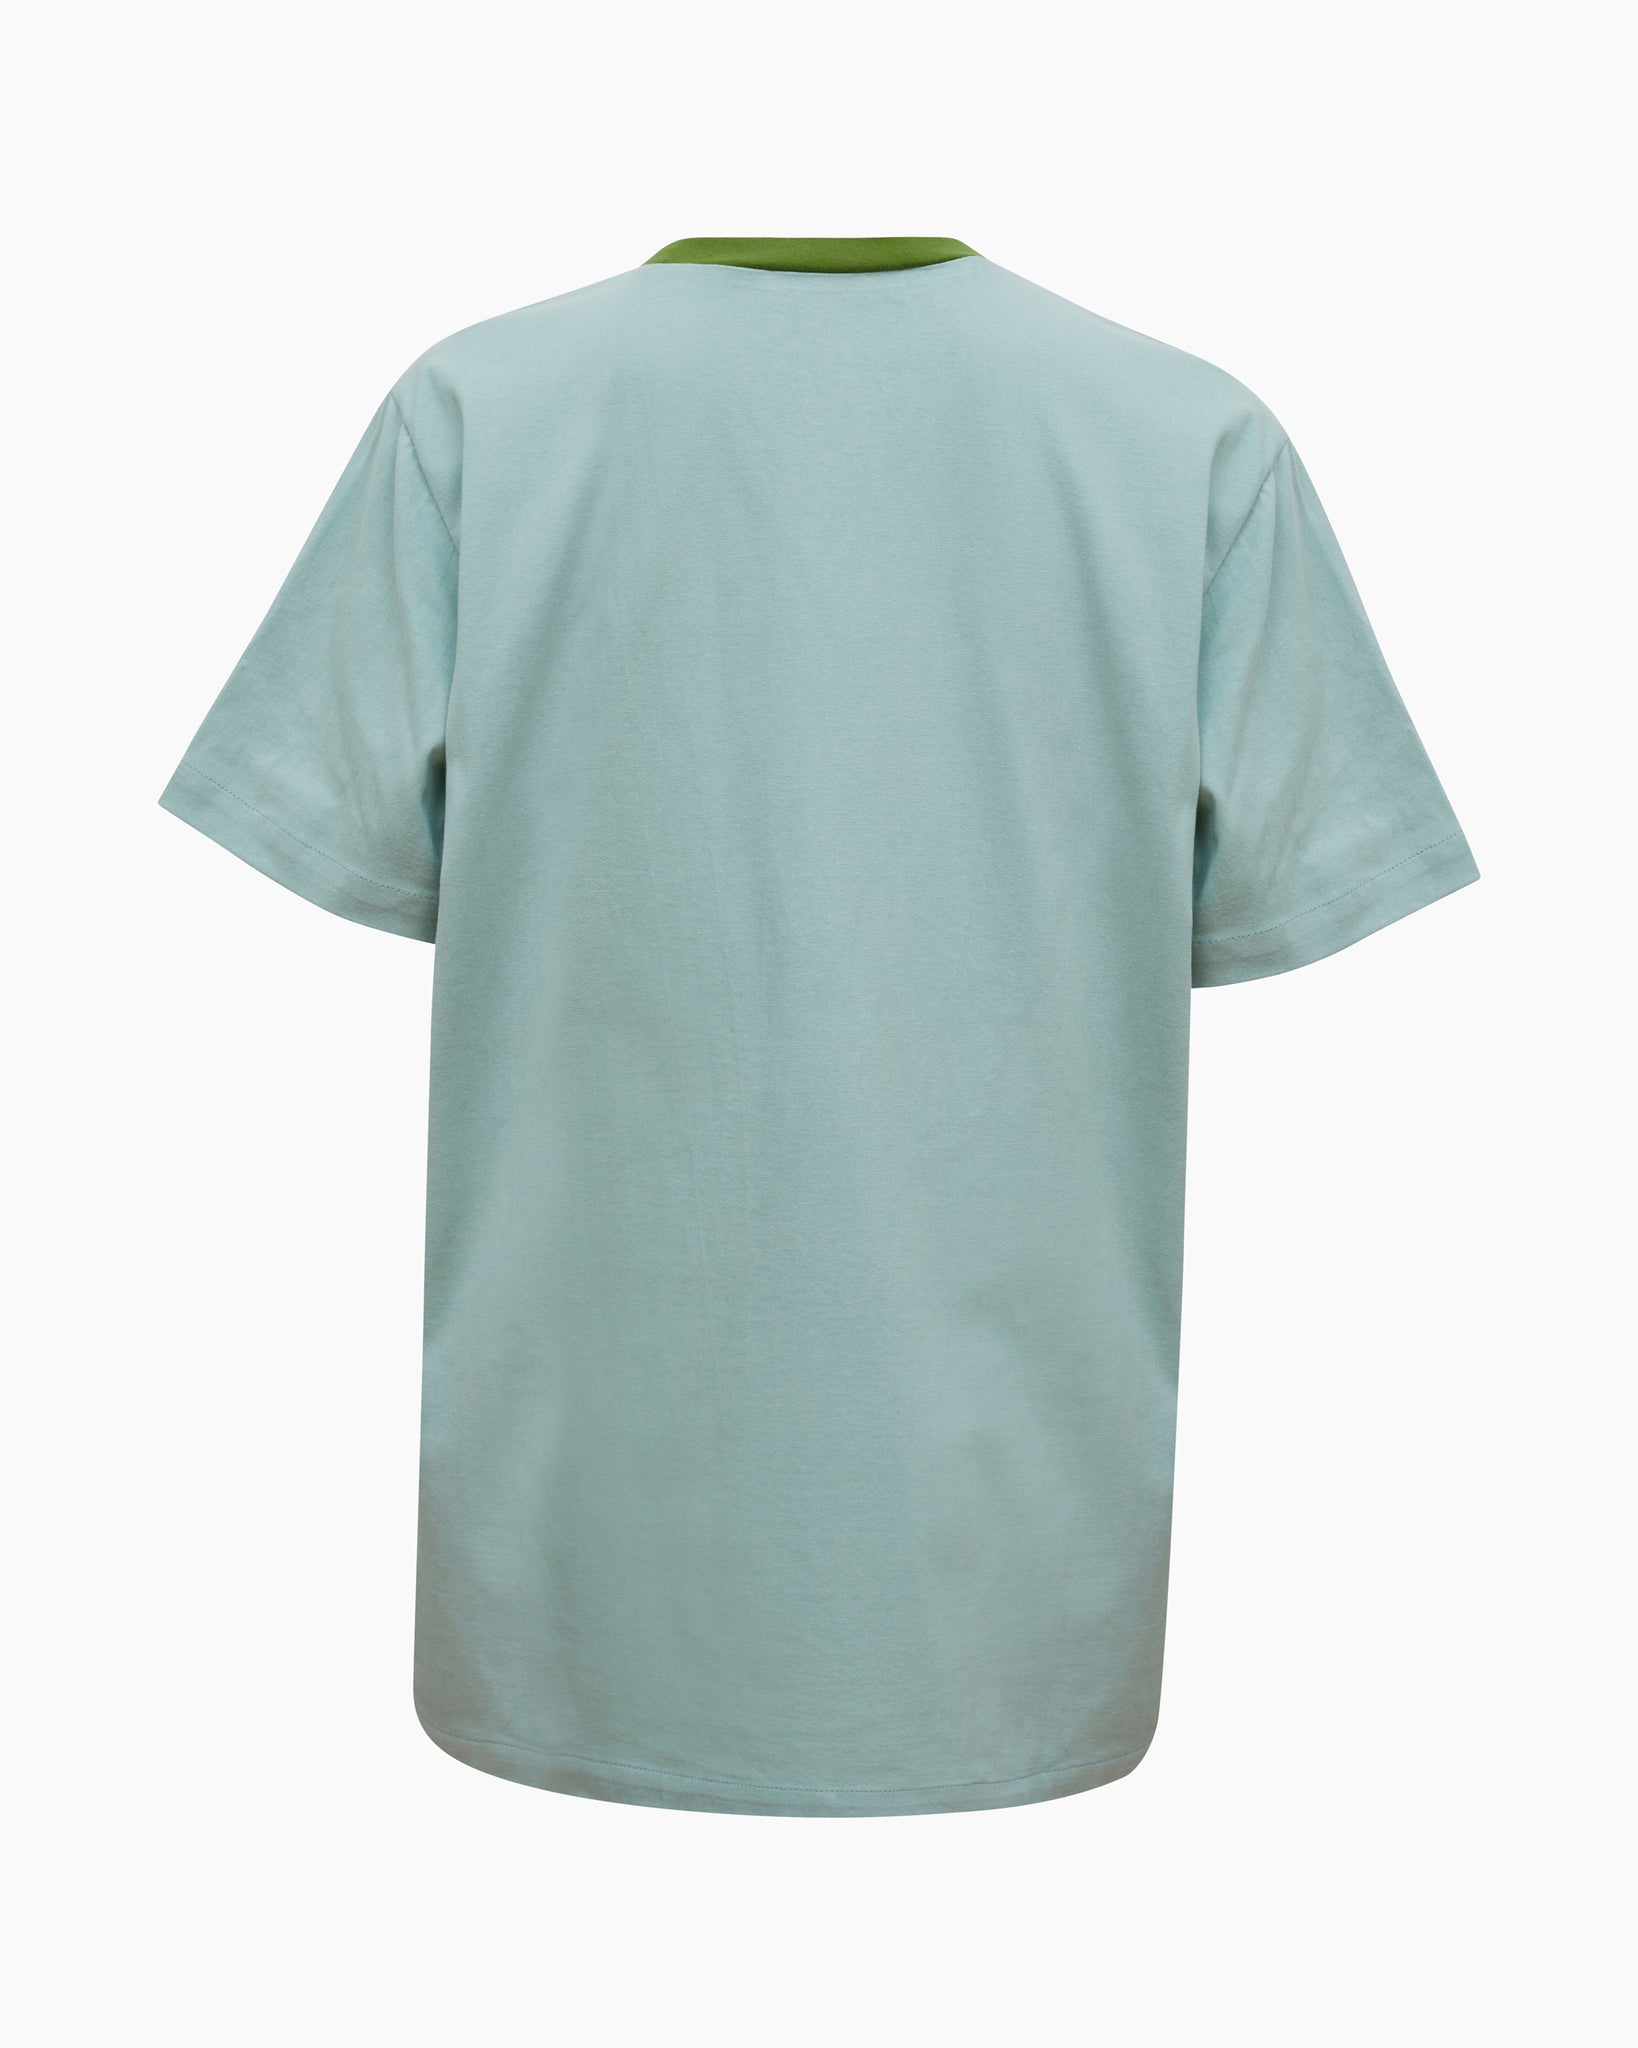 Rhys T-shirt Cotton Jersey Mint Blue + Green - Special Price